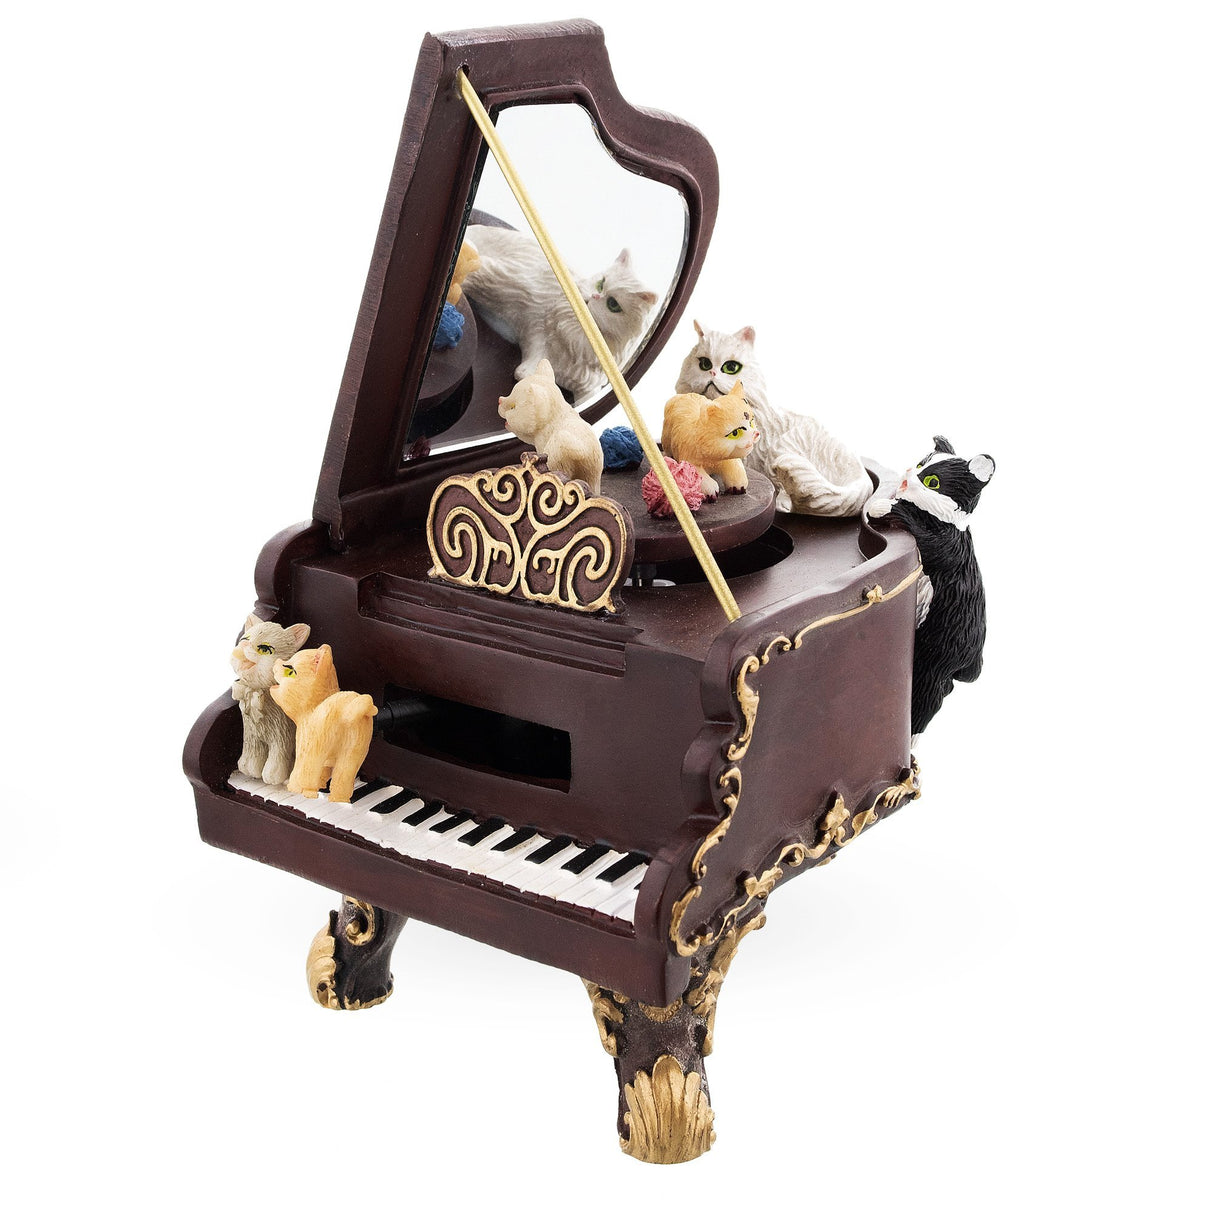 Resin Purrfect Piano Serenade: Animated Musical Figurine with Cats Playing in Brown color